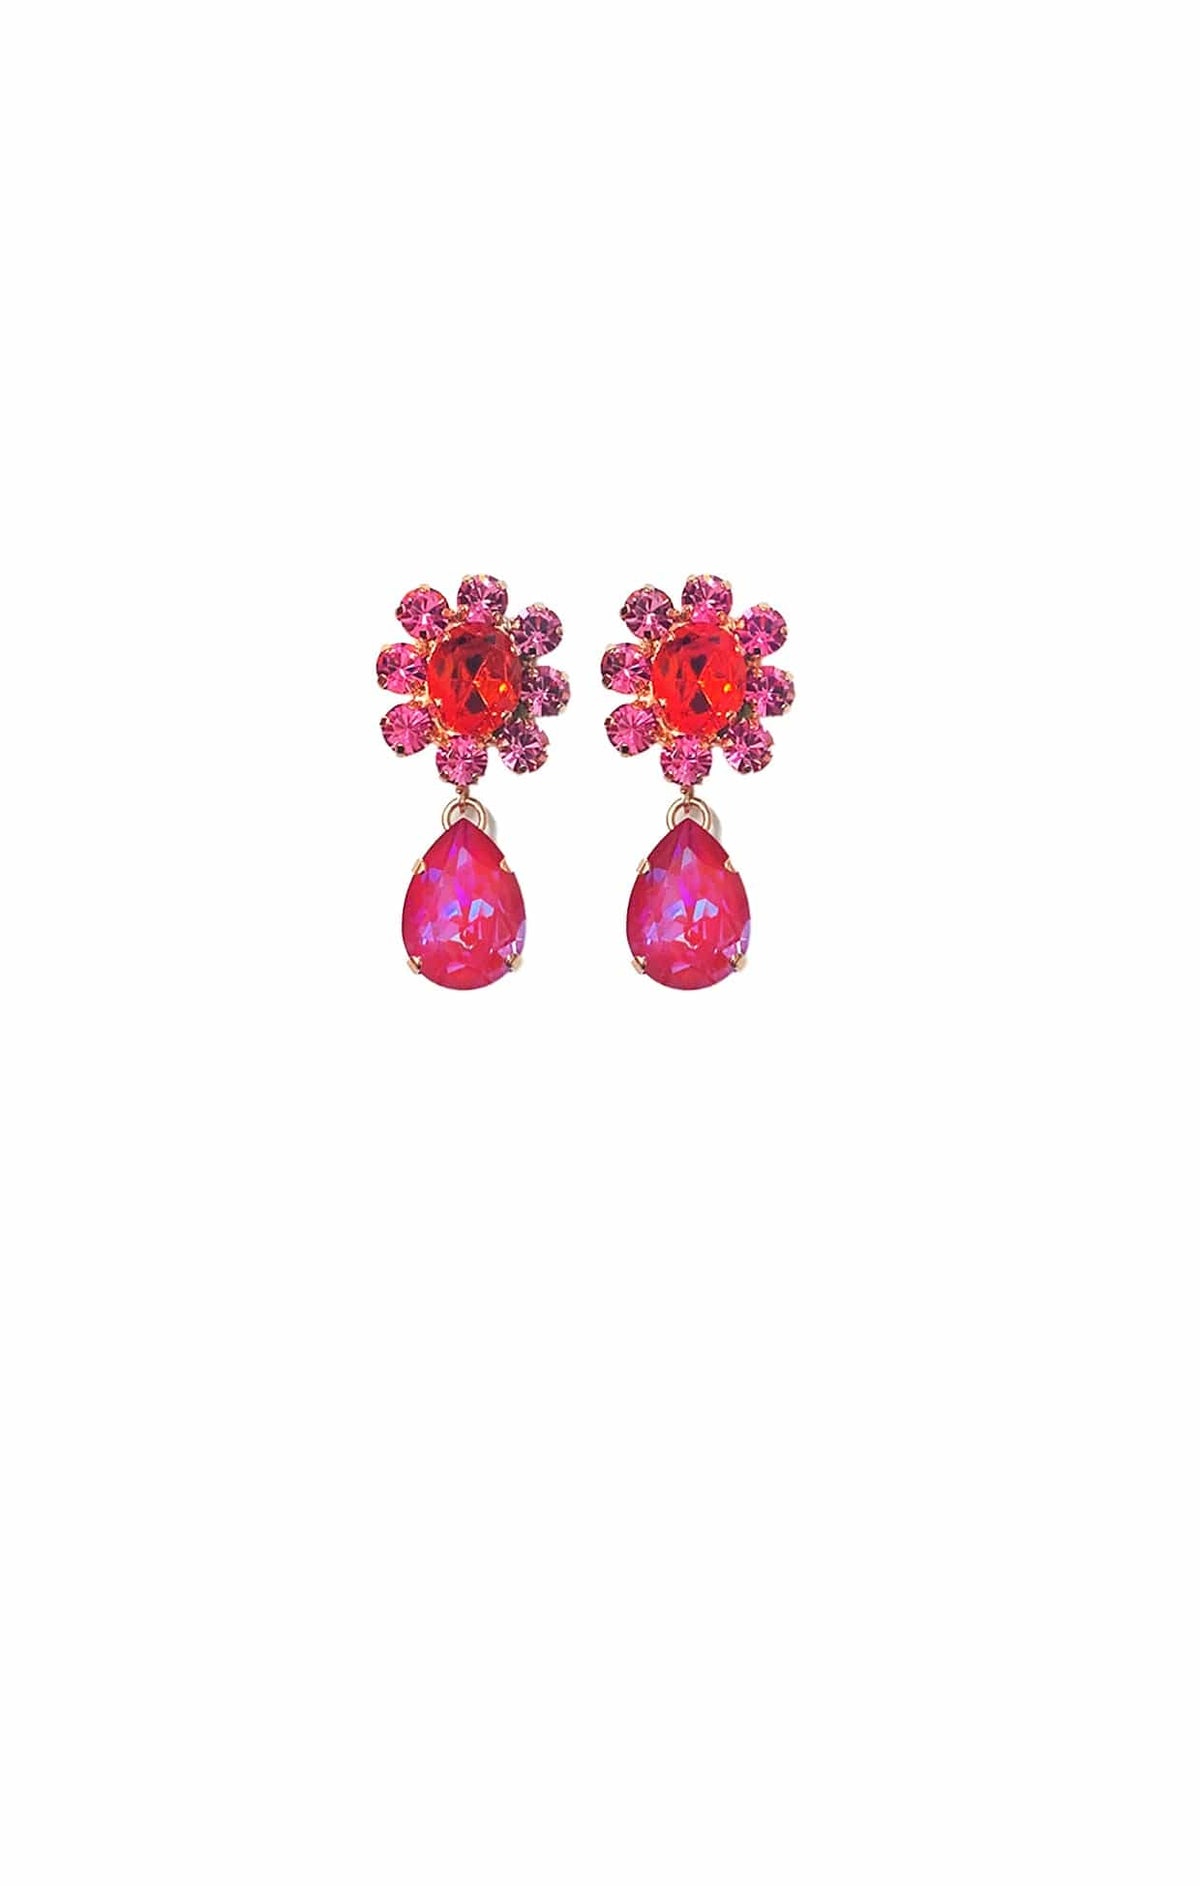 ACCESSORIES Earrings One Size / Red ZURICH EARRING IN RED PINK